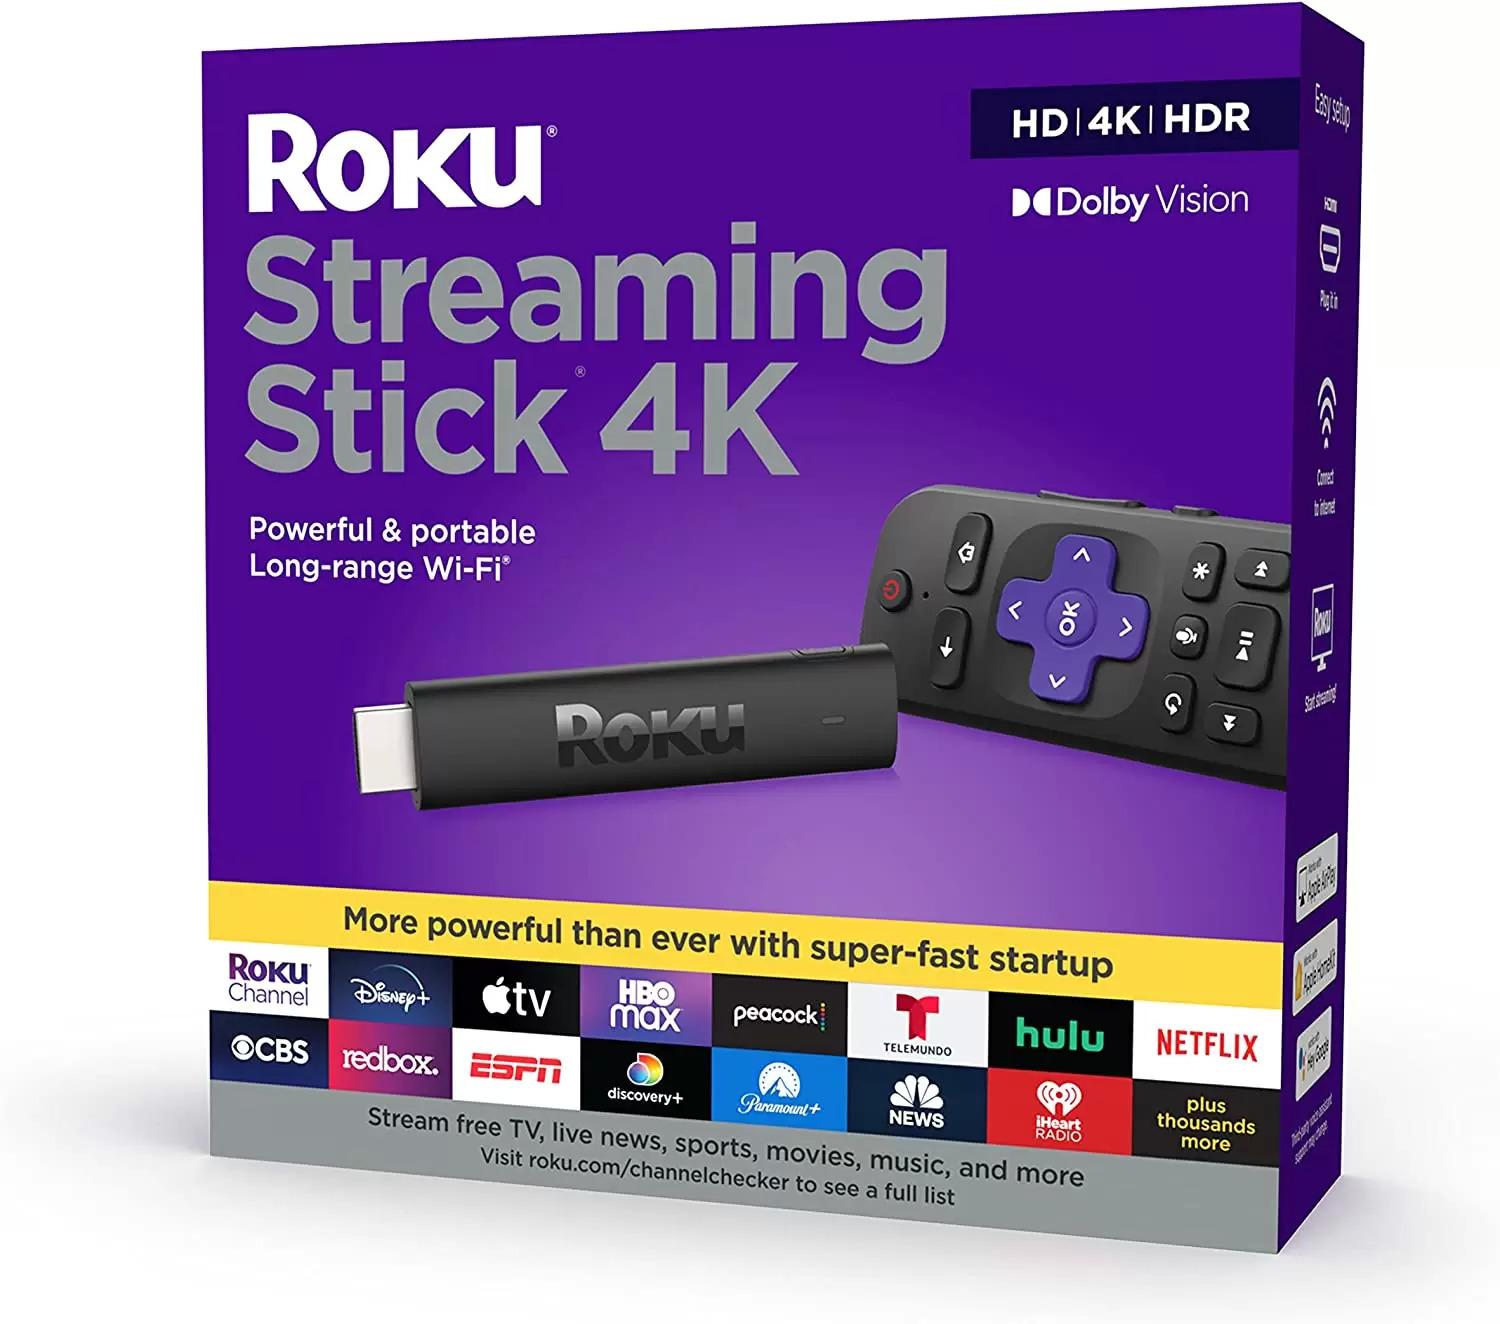 Roku Streaming Stick 4K 2021 HDR Media Player for $24.98